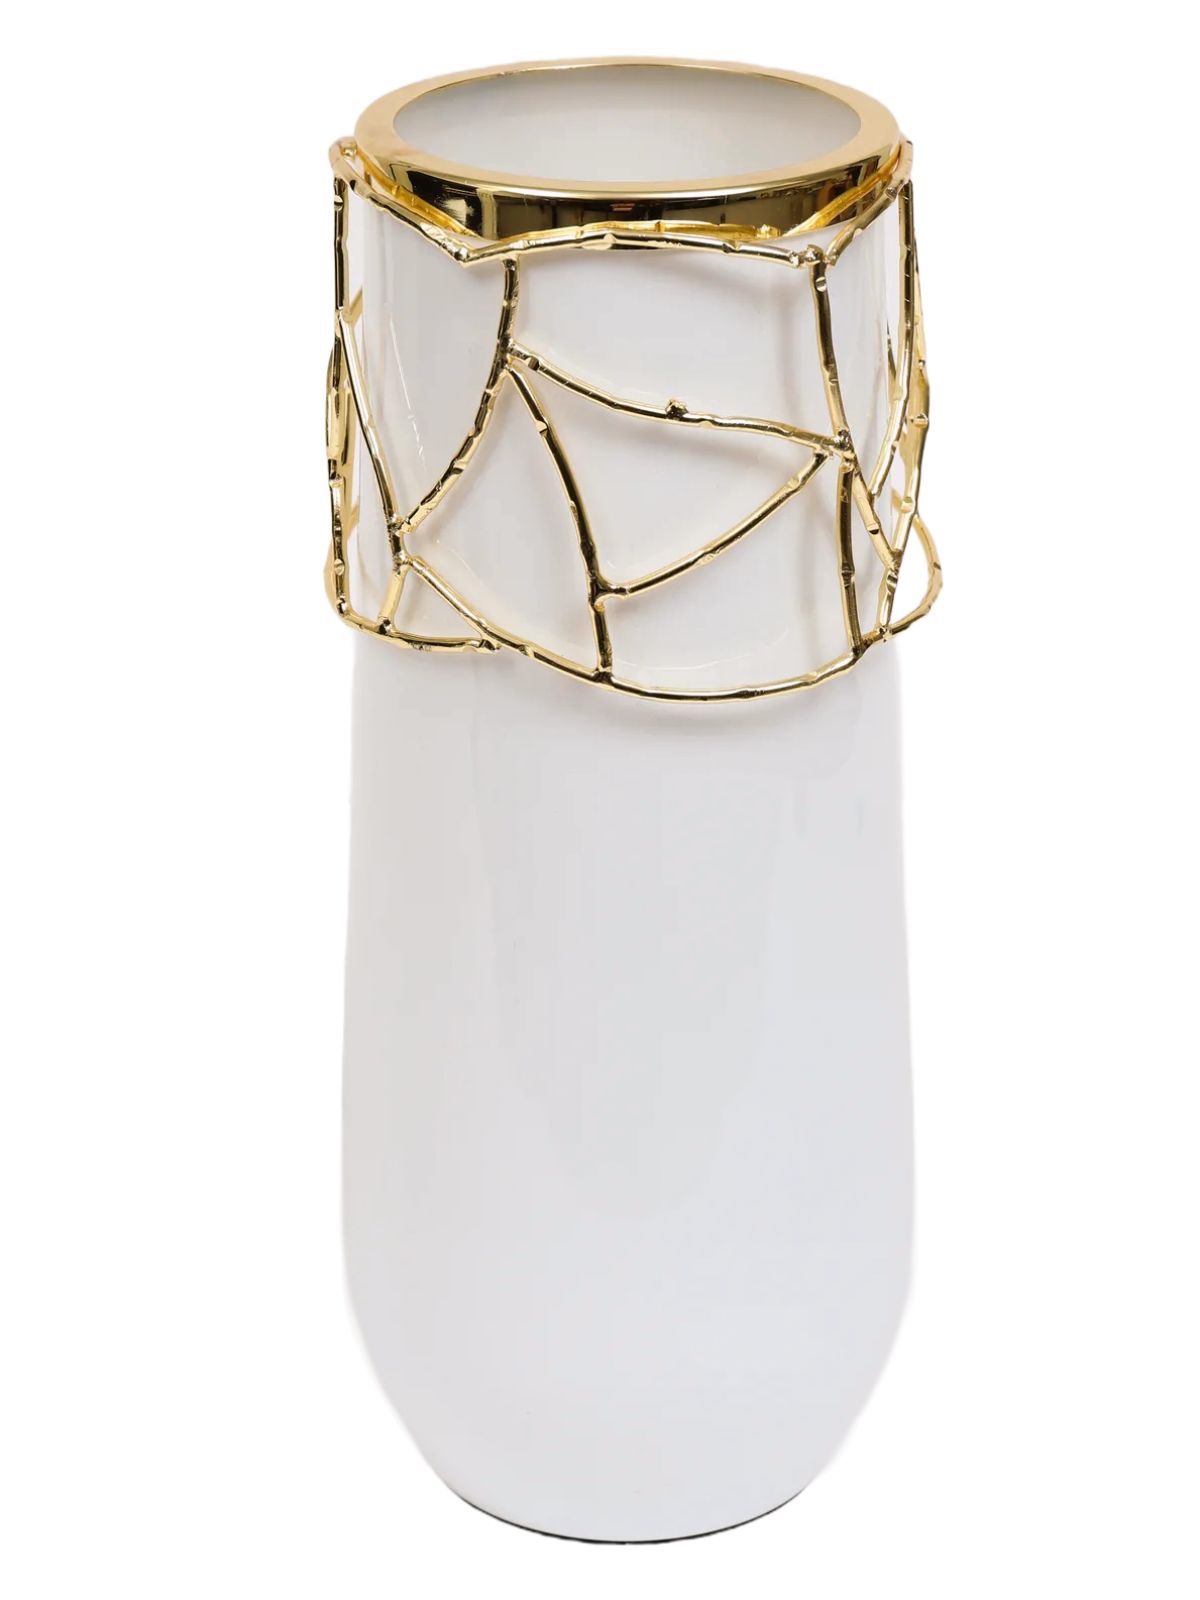 Luxury White Glass Decorative Vase With Gold Metal Mesh Design On Top - KYA Home Decor. 